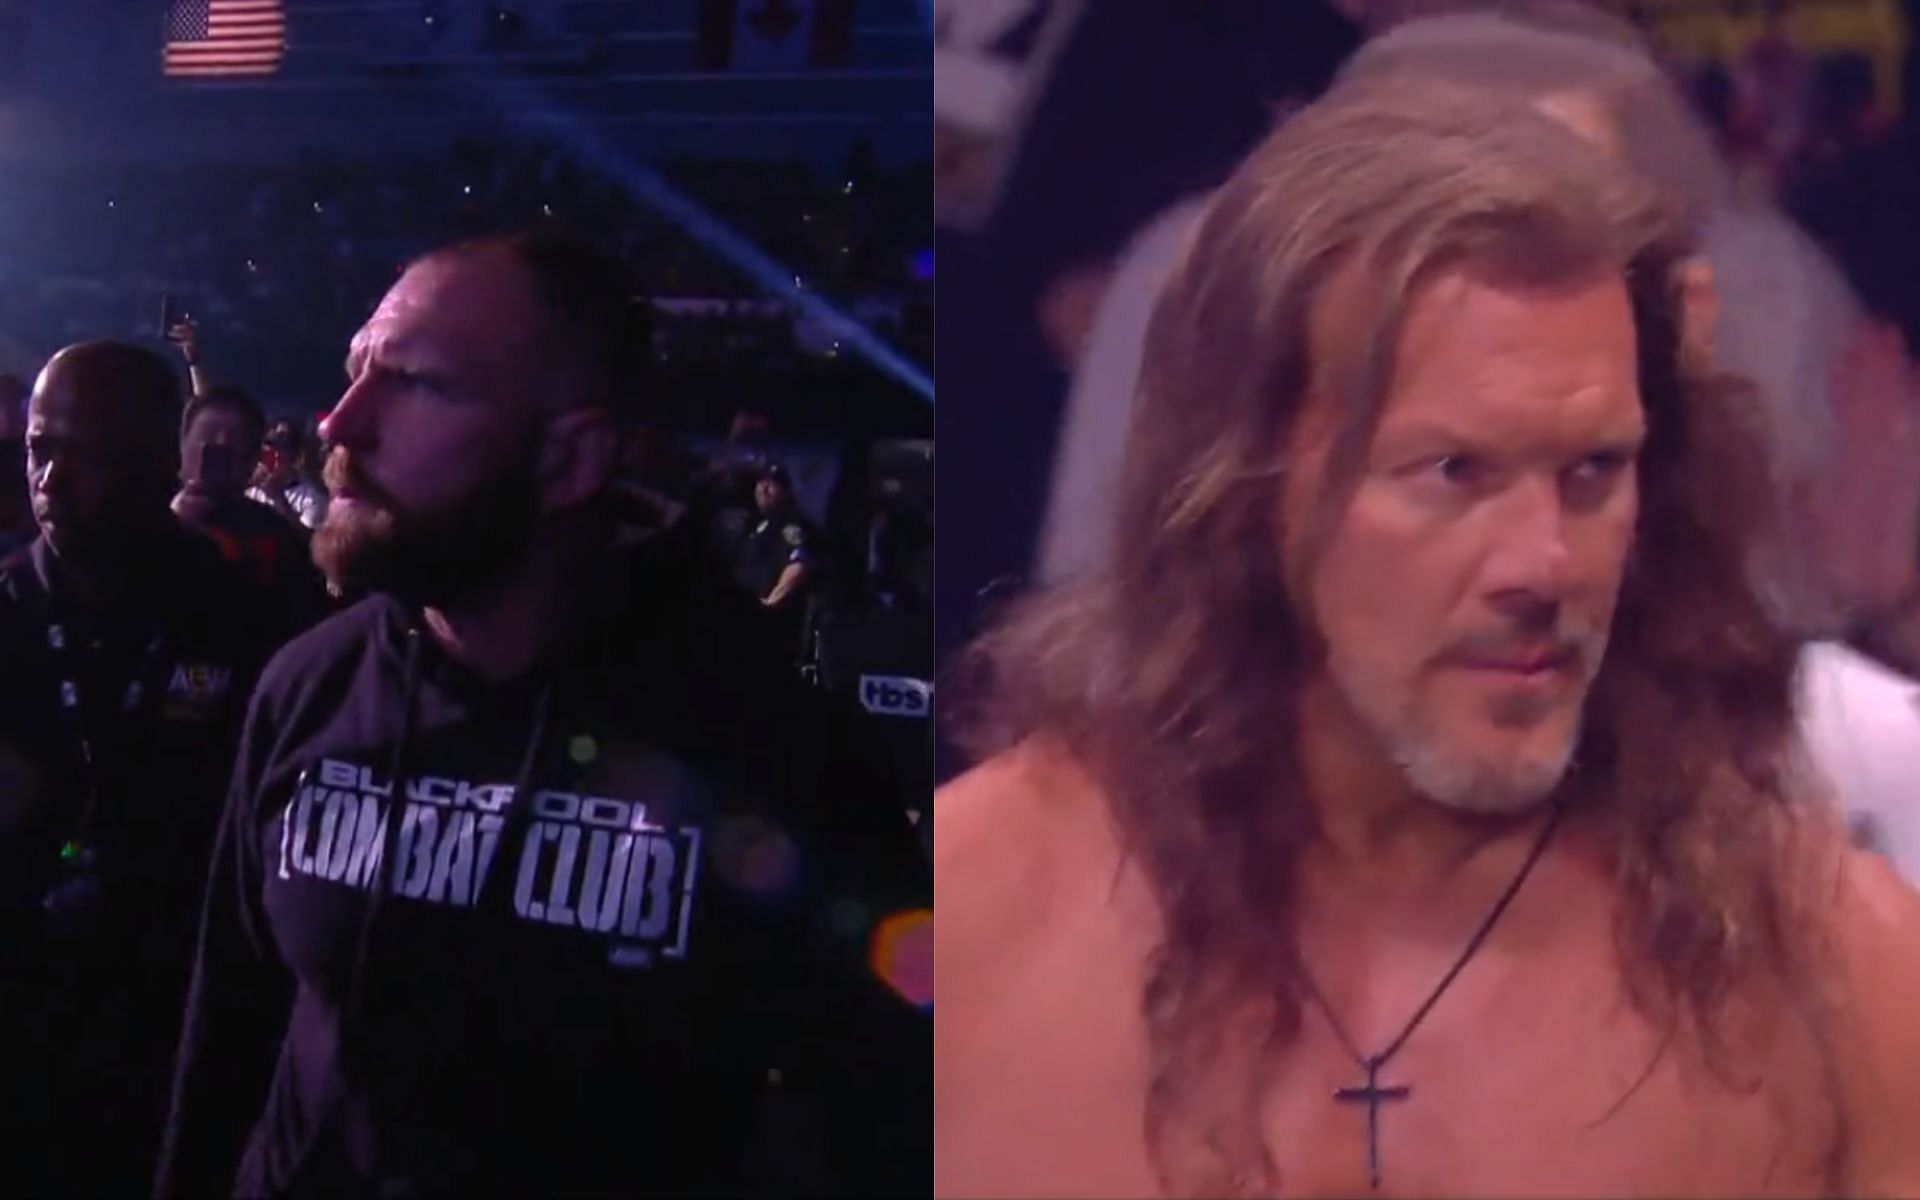 Jon Moxley and Chris Jericho battled this week on AEW Dynamite with their respective partners.